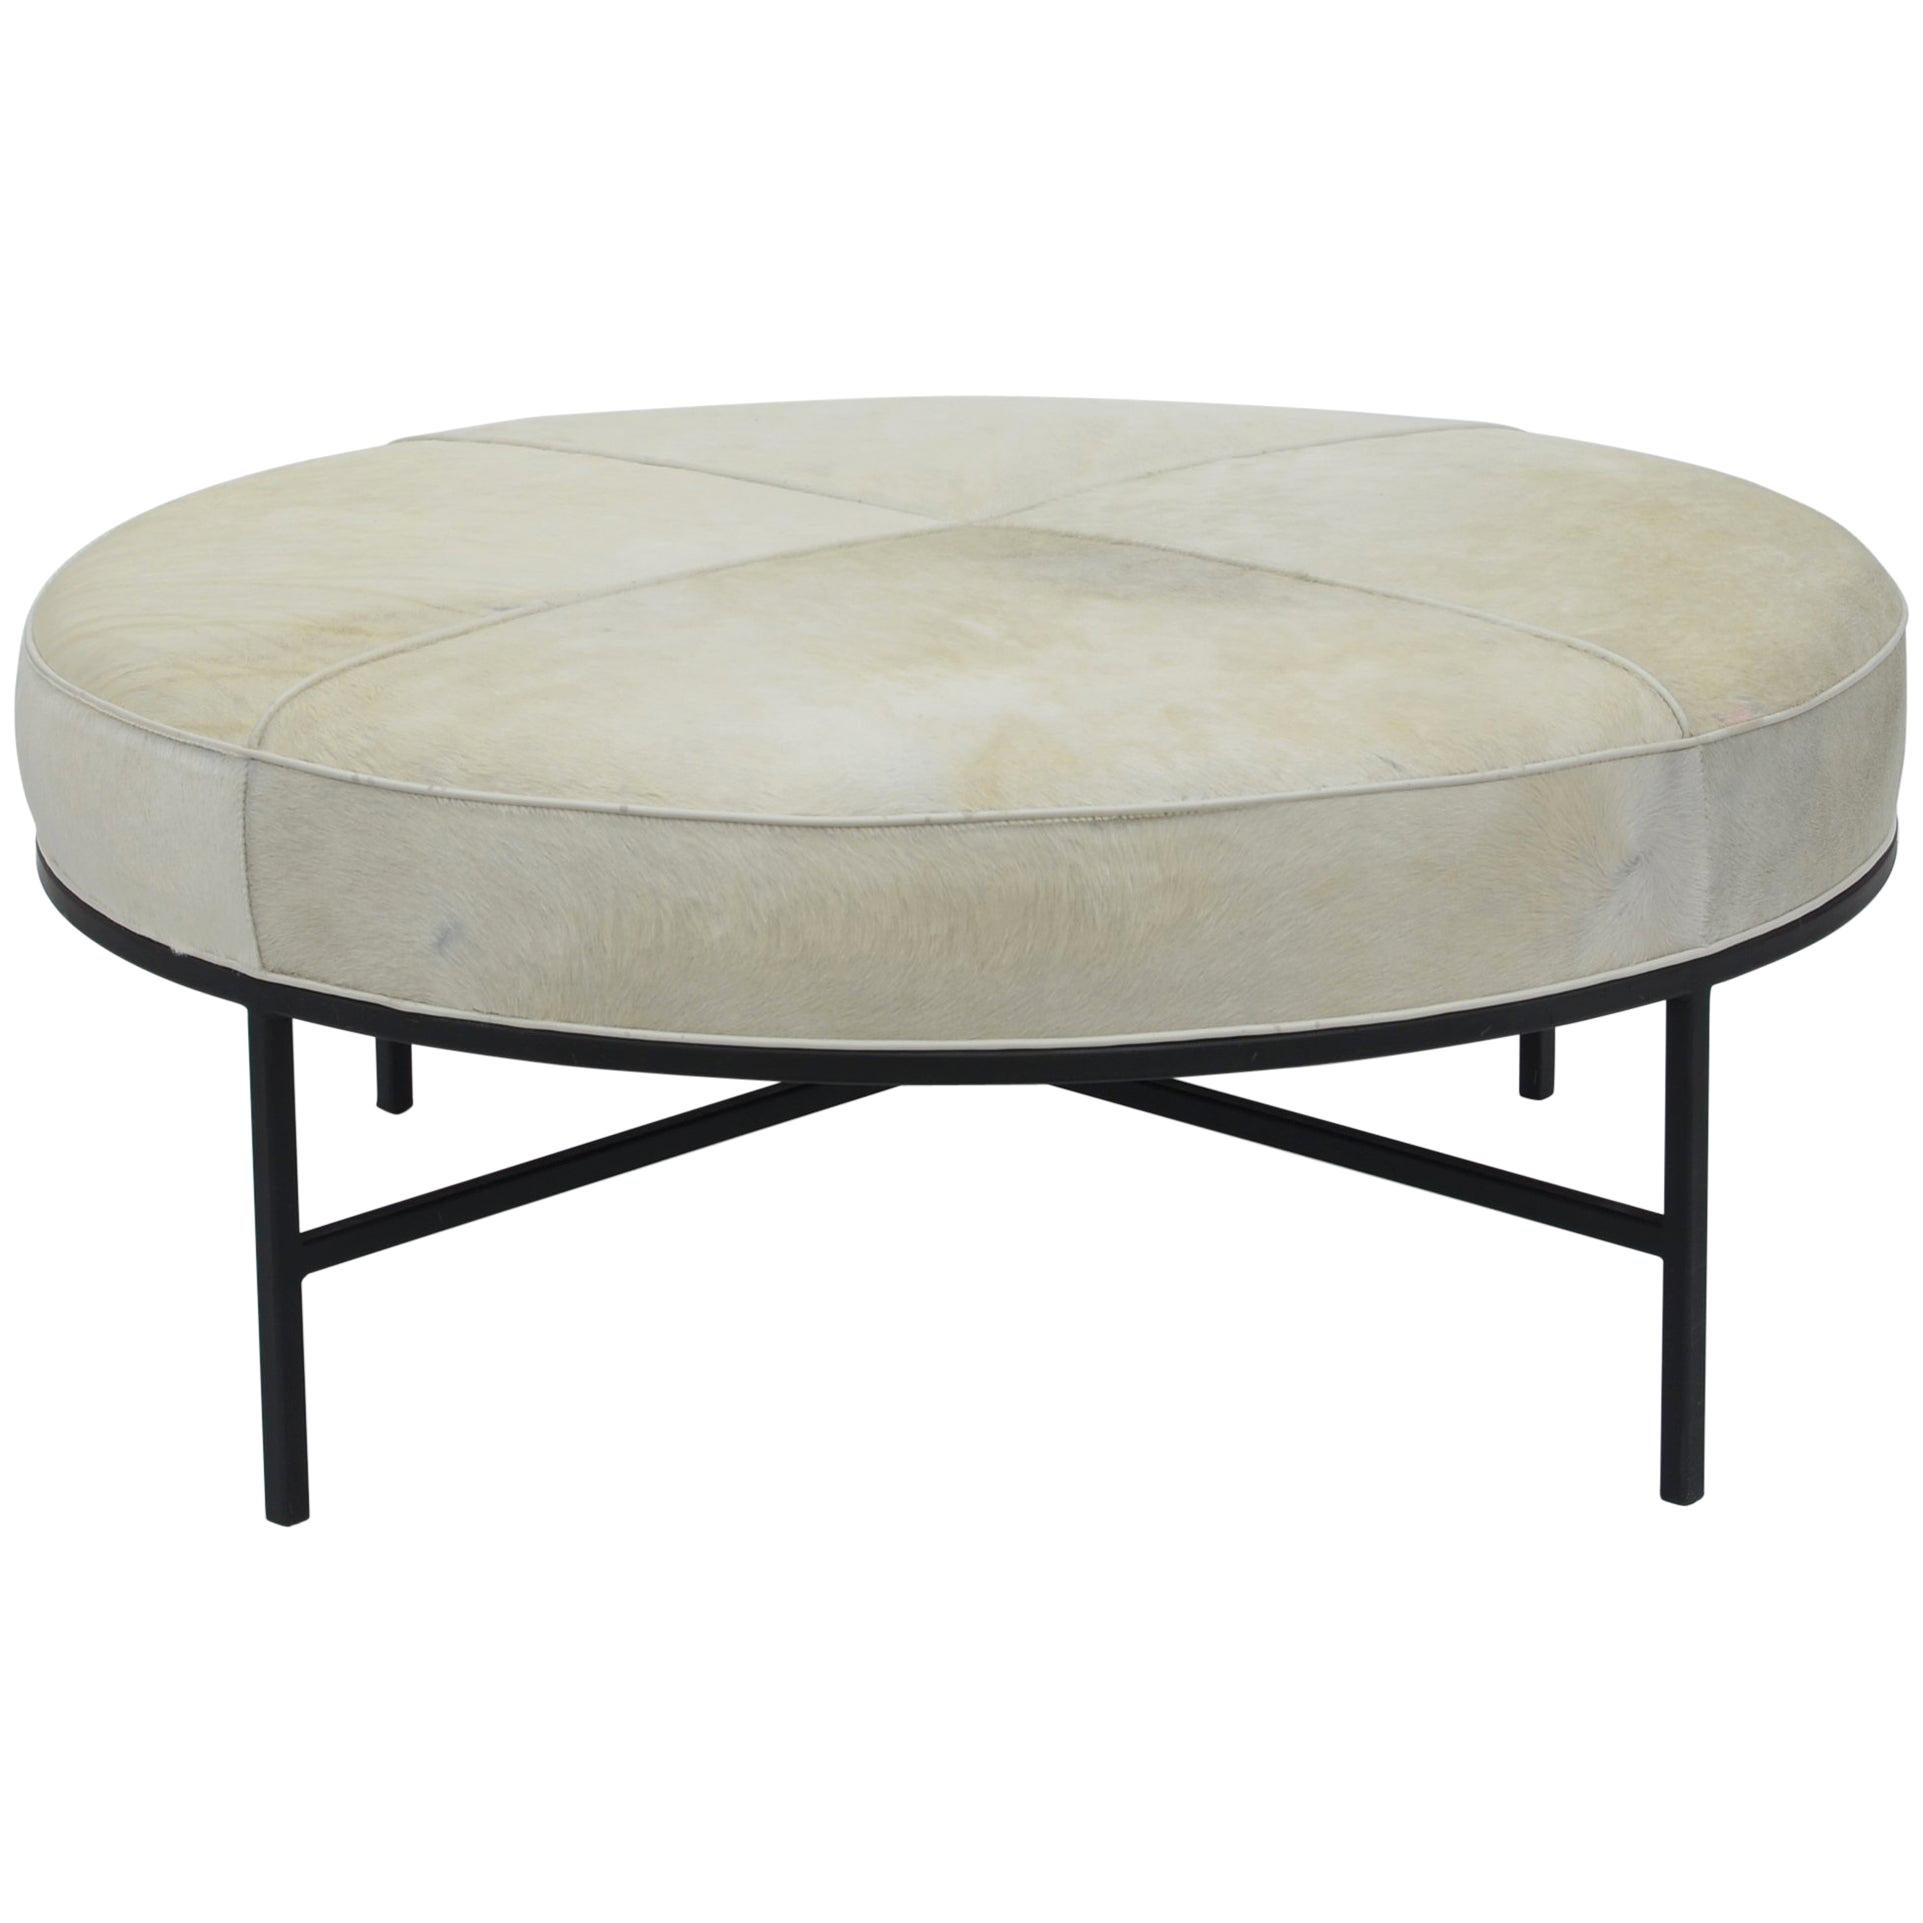 Chic White Hide and Blackened Steel 'Tambour' Ottoman by Design Frères